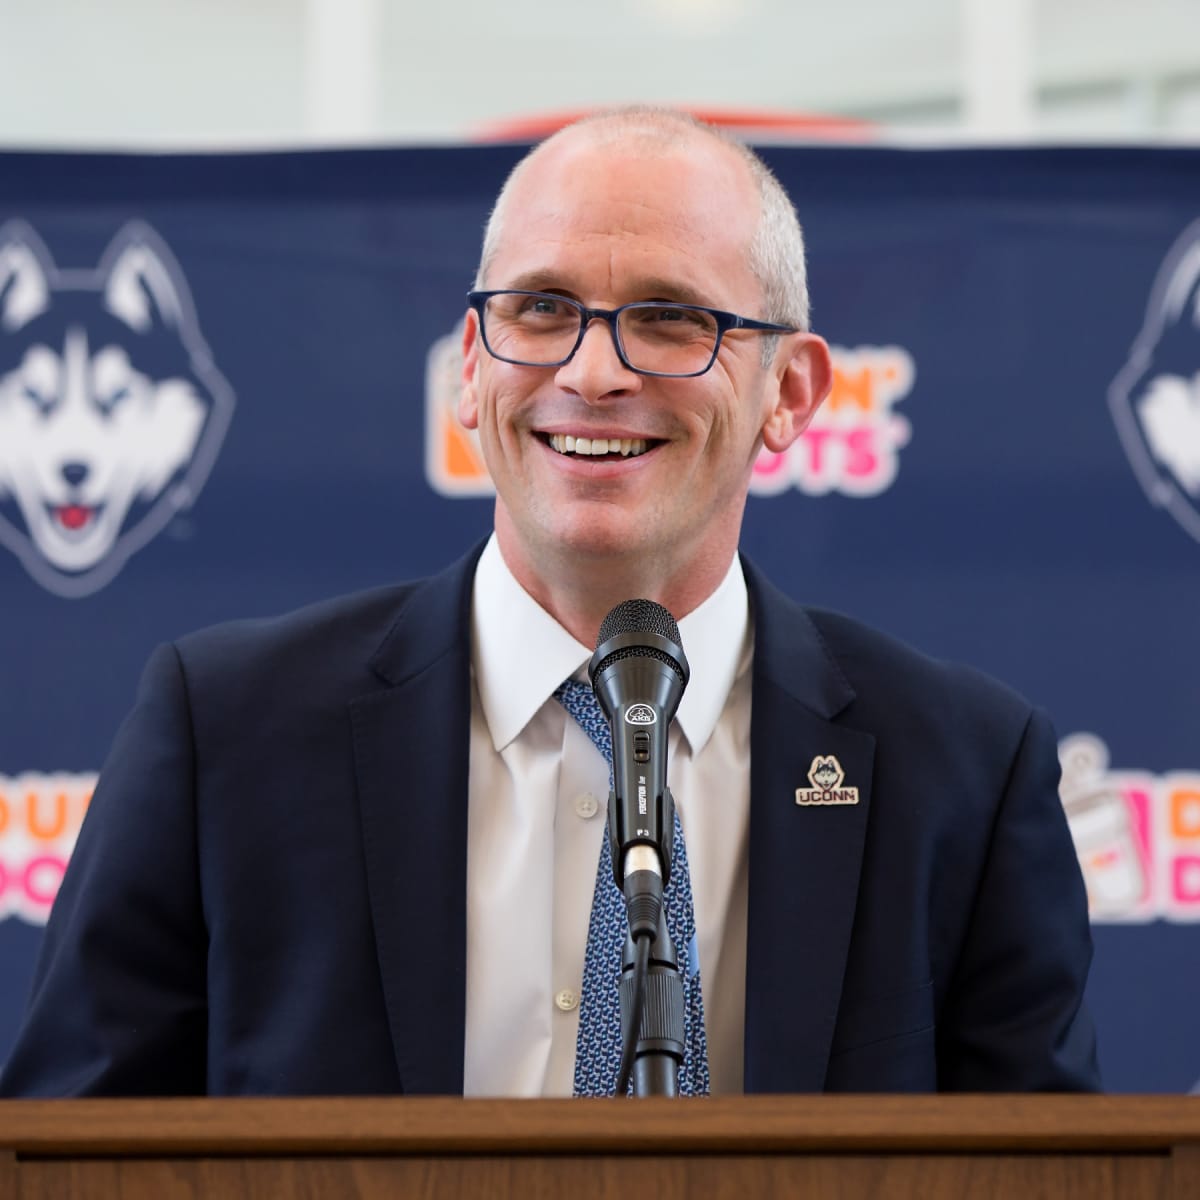 Dan Hurley Discusses Transfer Portal, “UConn Way” During Coaches Road Show  - Huskies Report